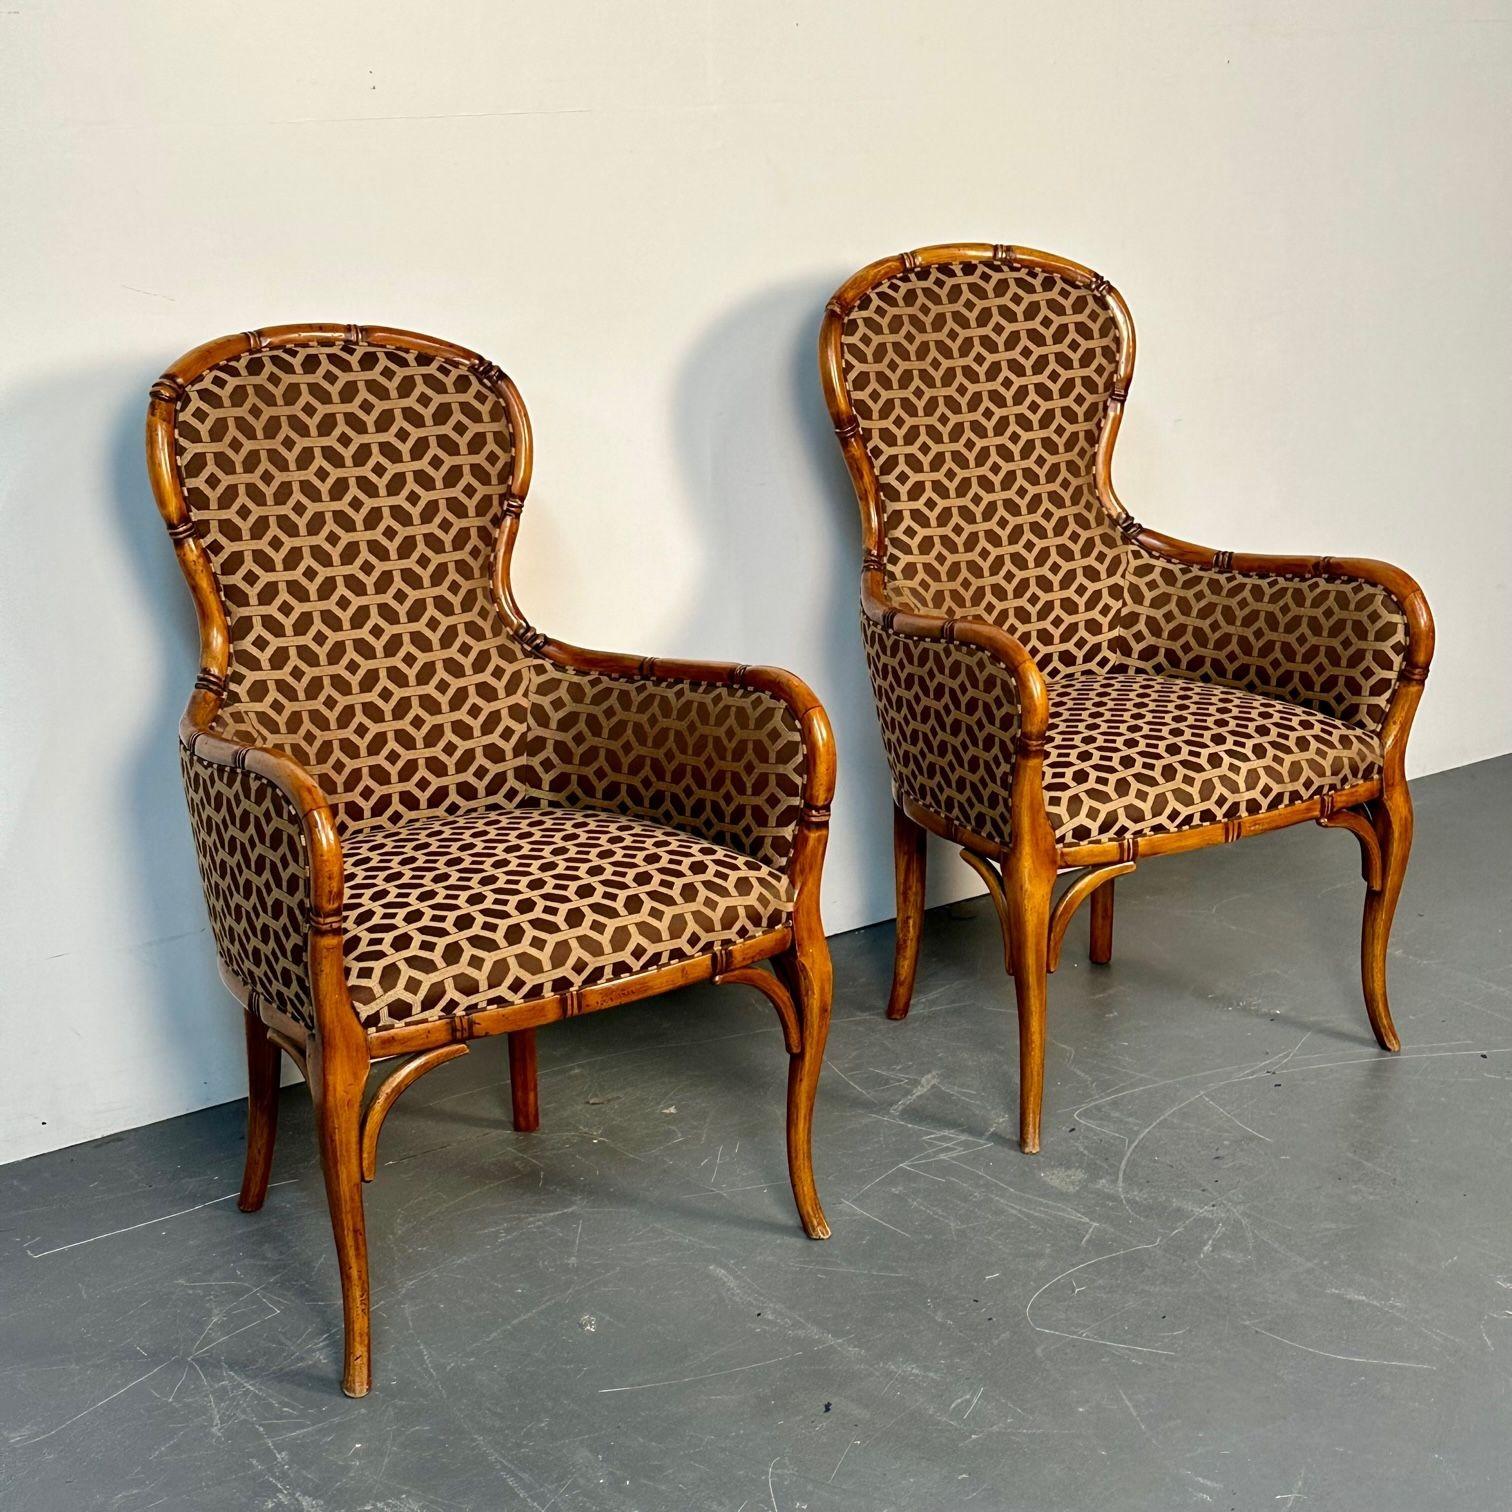 Mid-20th Century Pair of Fruitwood French Bamboo Carved Arm / Club / Accent Chairs, Kravet Fabric For Sale